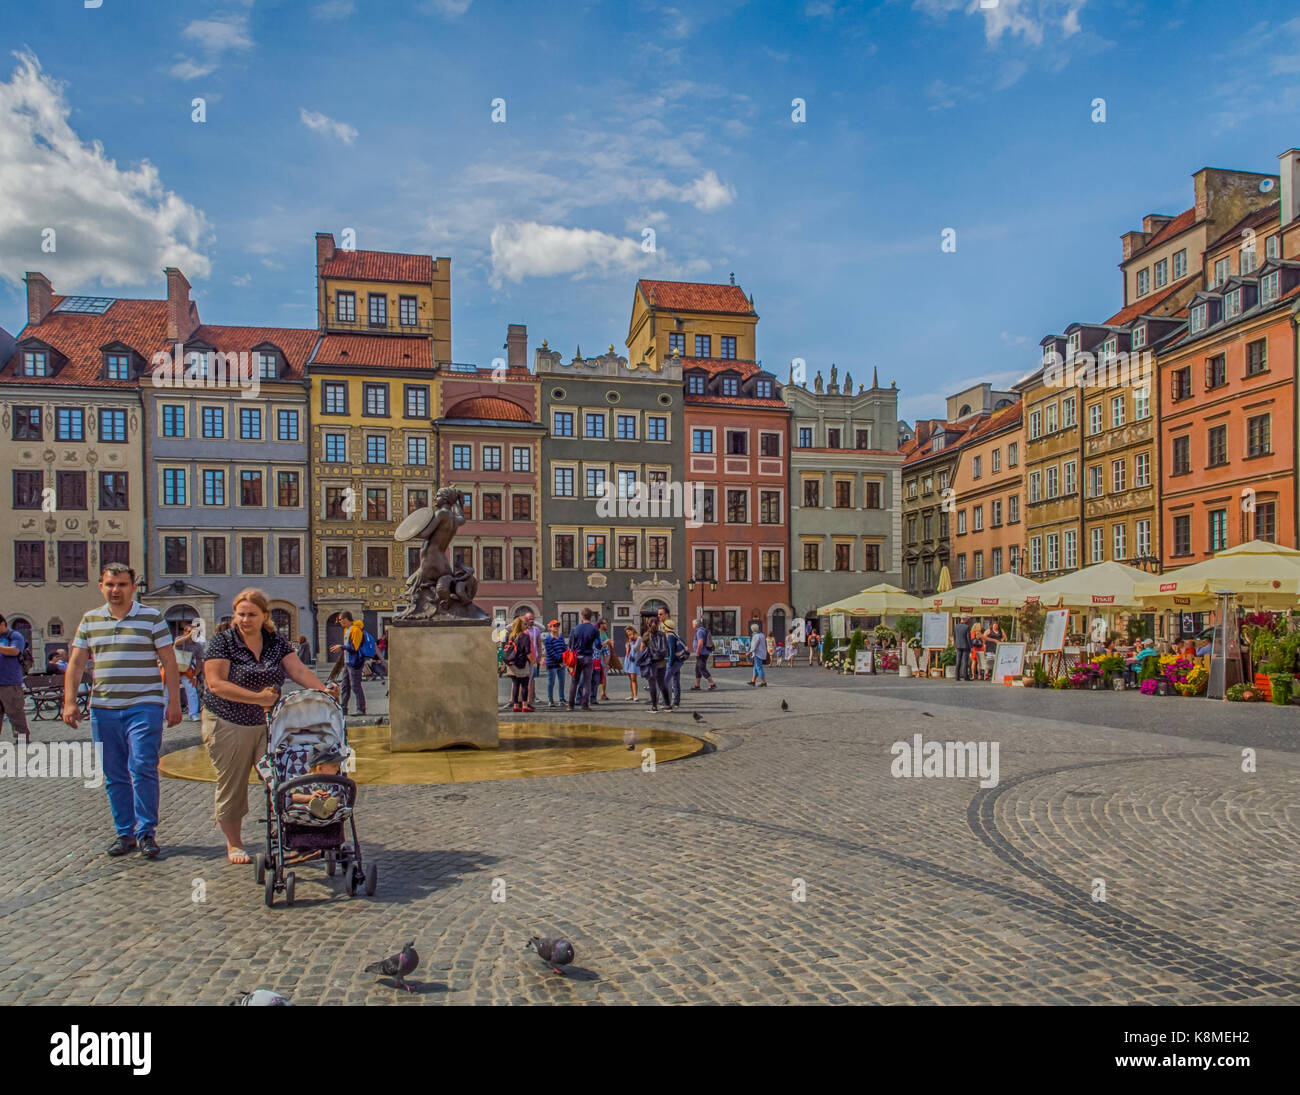 Warsaw, Poland - June 02, 2017: Cafes, stalls, colorful buildings  and the people at Old Town Square (Rynek Stare Miasto) during the summer time, UNES Stock Photo